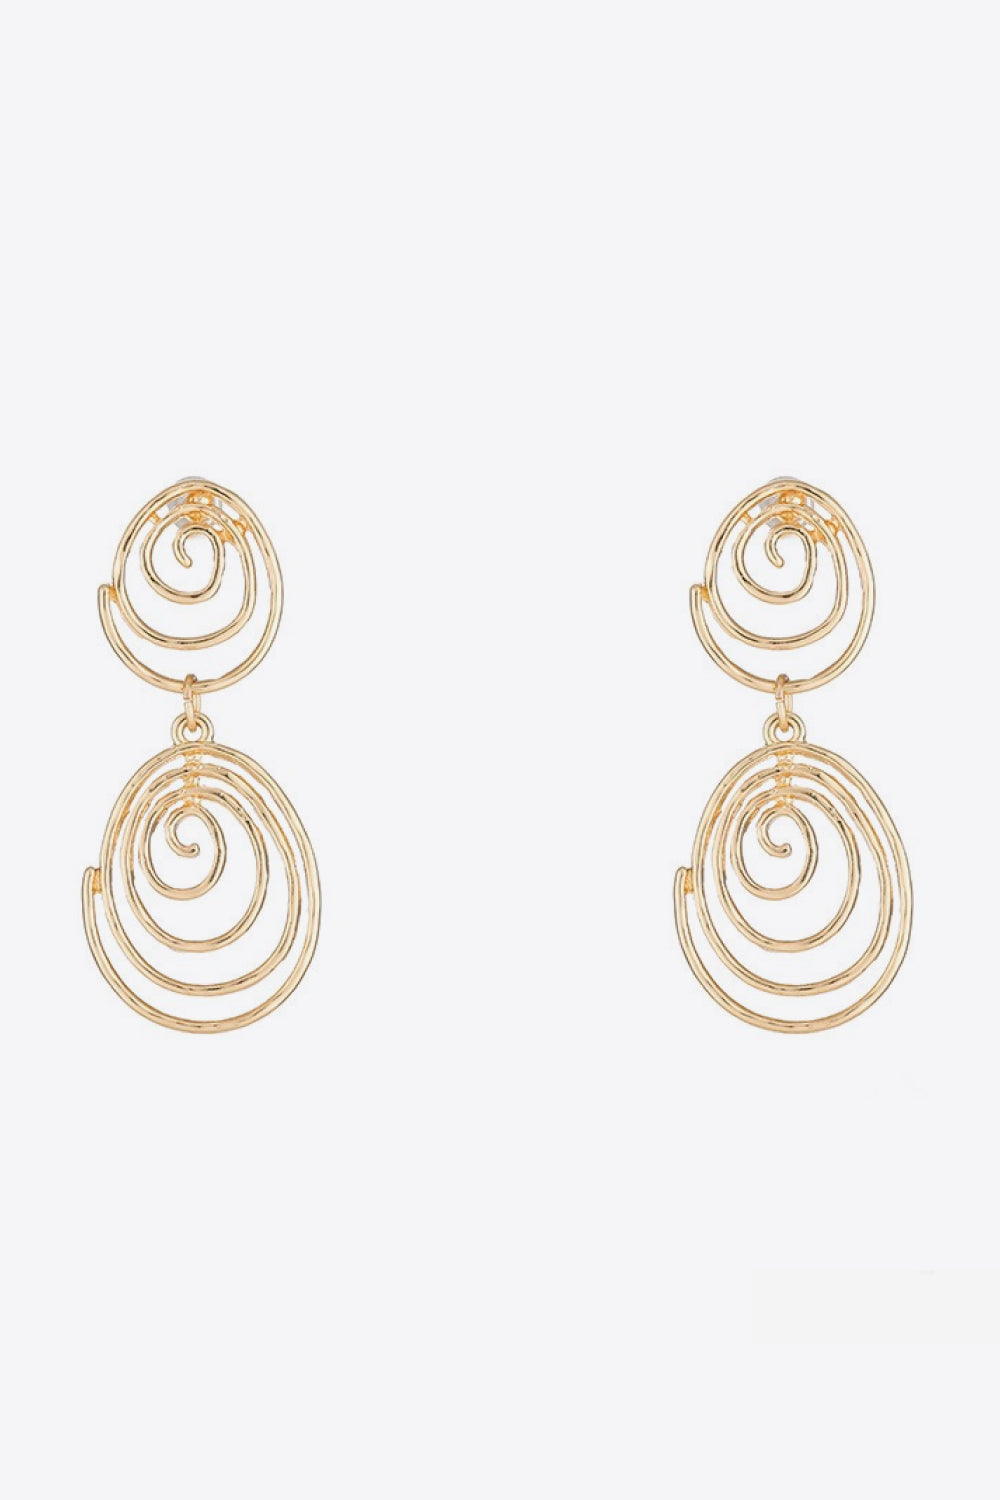 18K GOLD-PLATED ALLOY SPIRAL EARRINGS